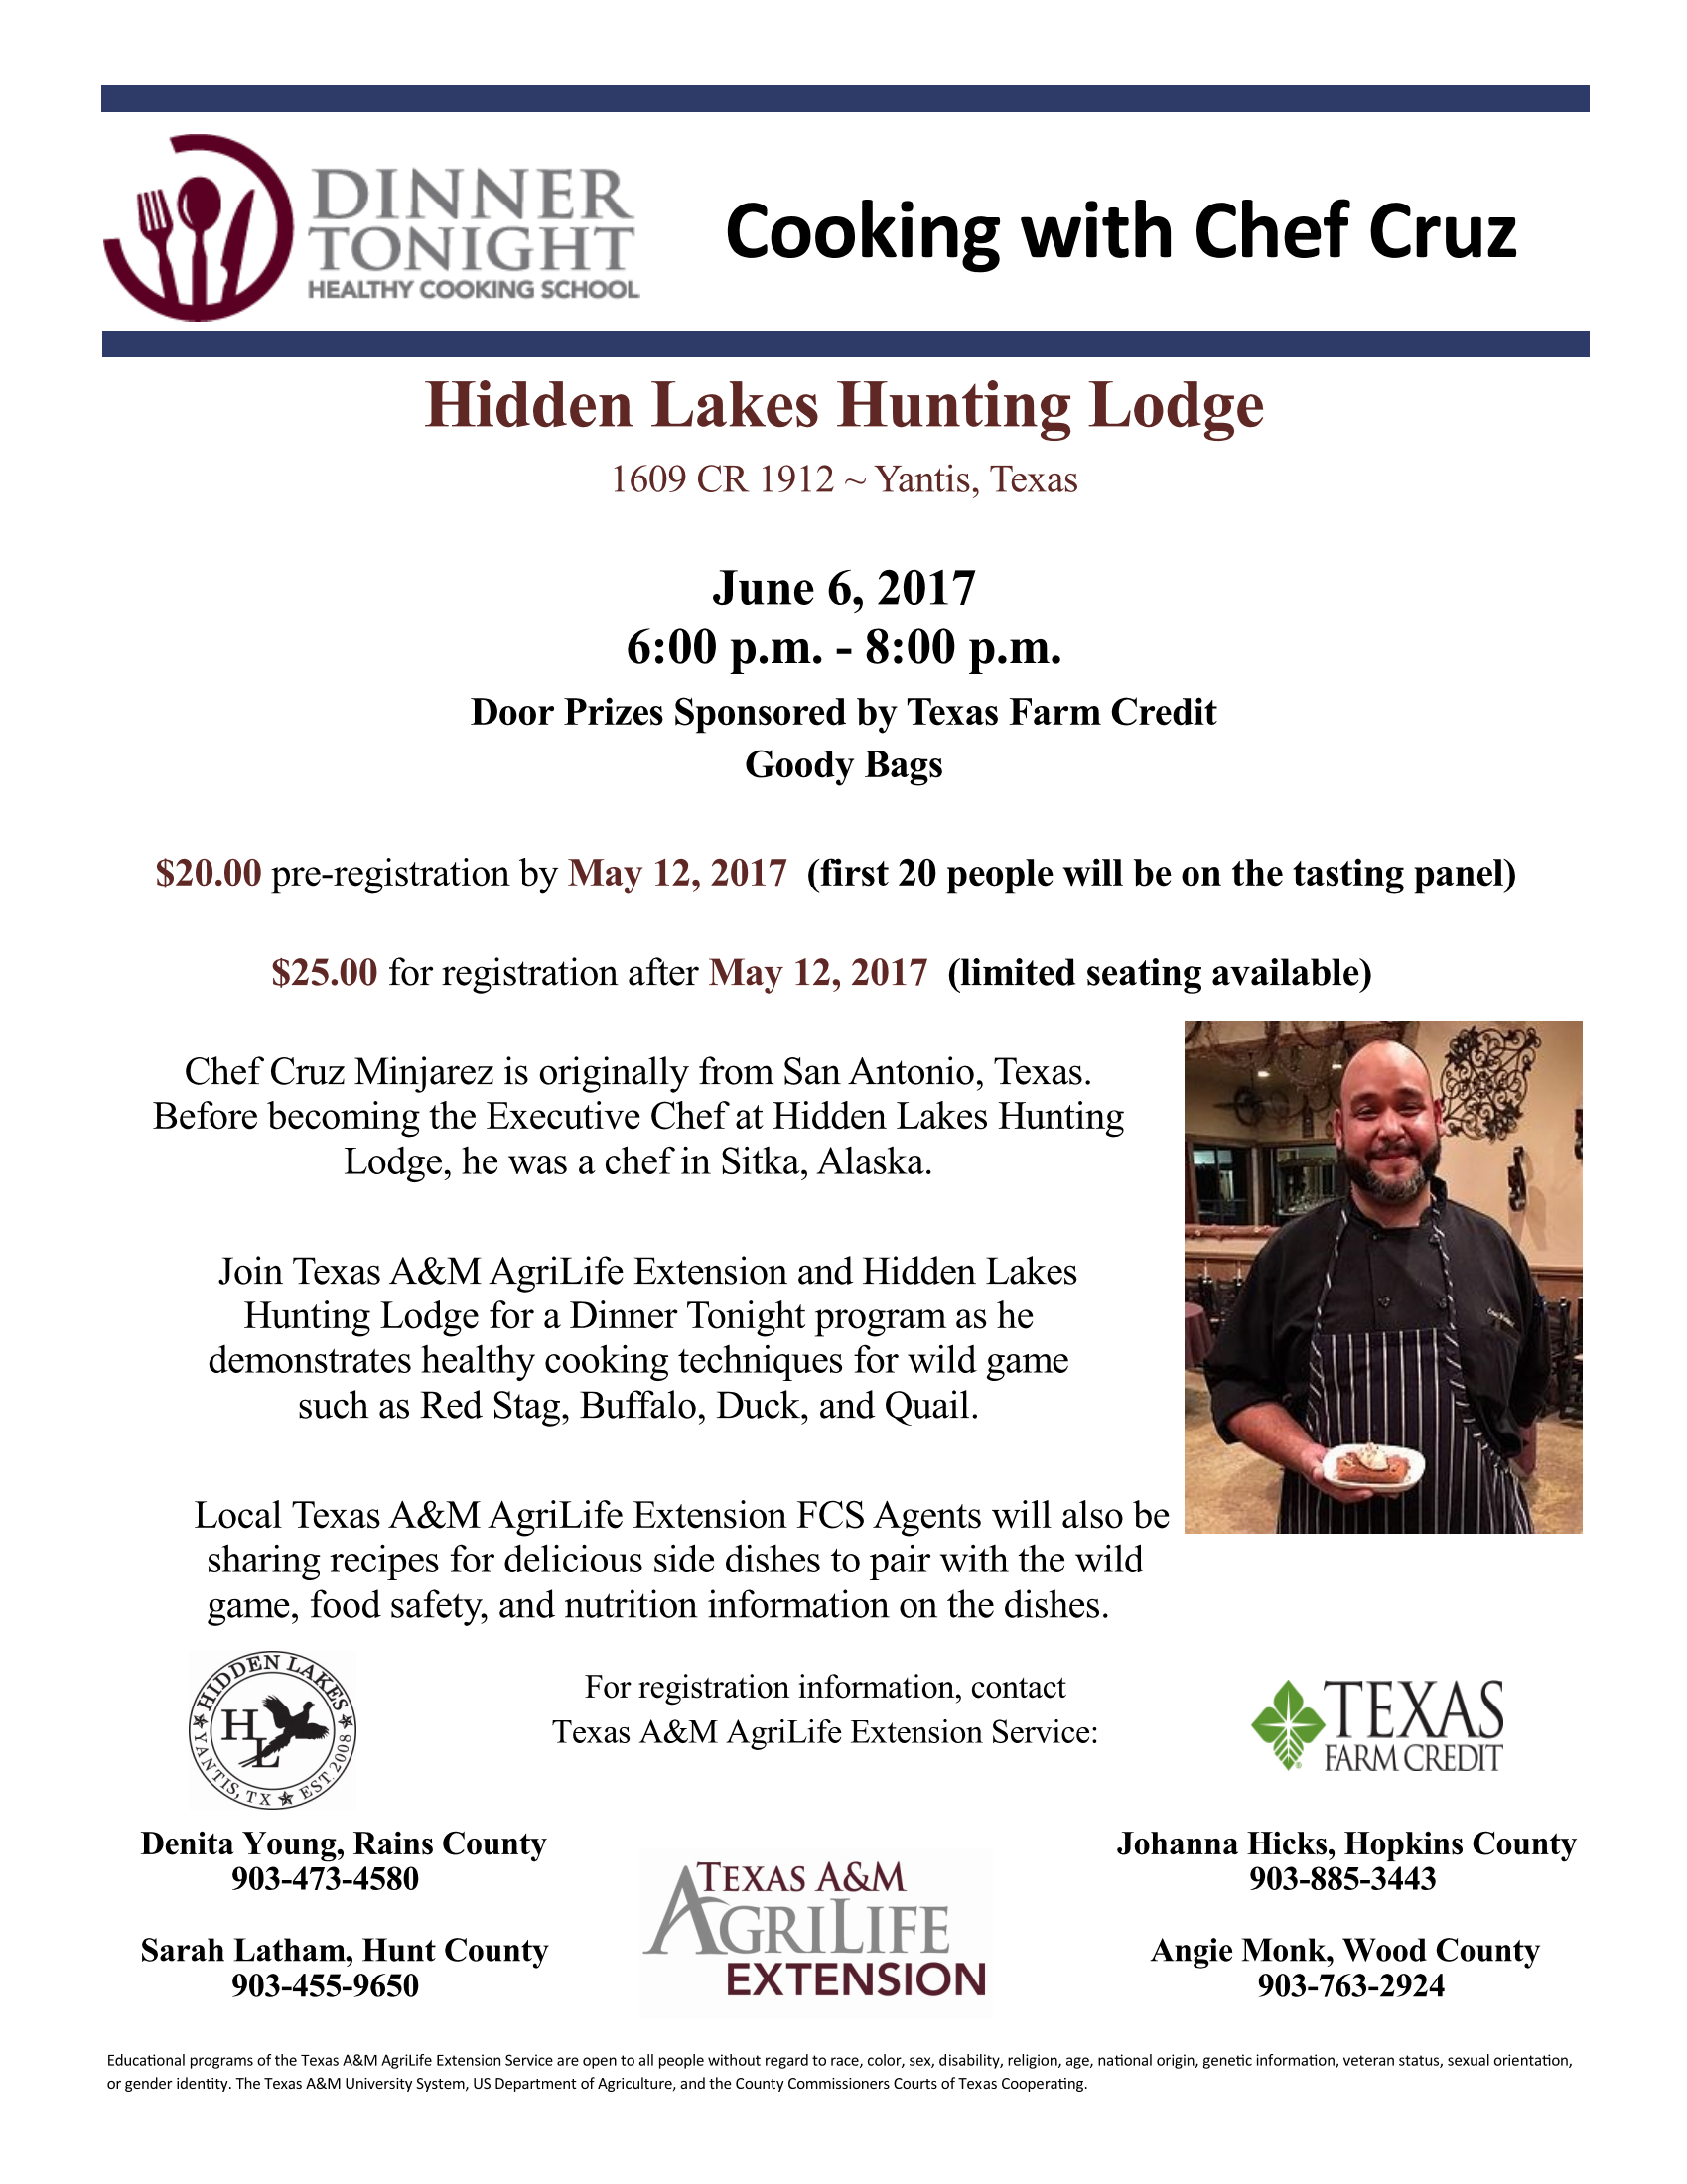 Dinner Tonight: Cooking with Chef Cruz is Tomorrow Night at Hidden Lakes Hunting Lodge